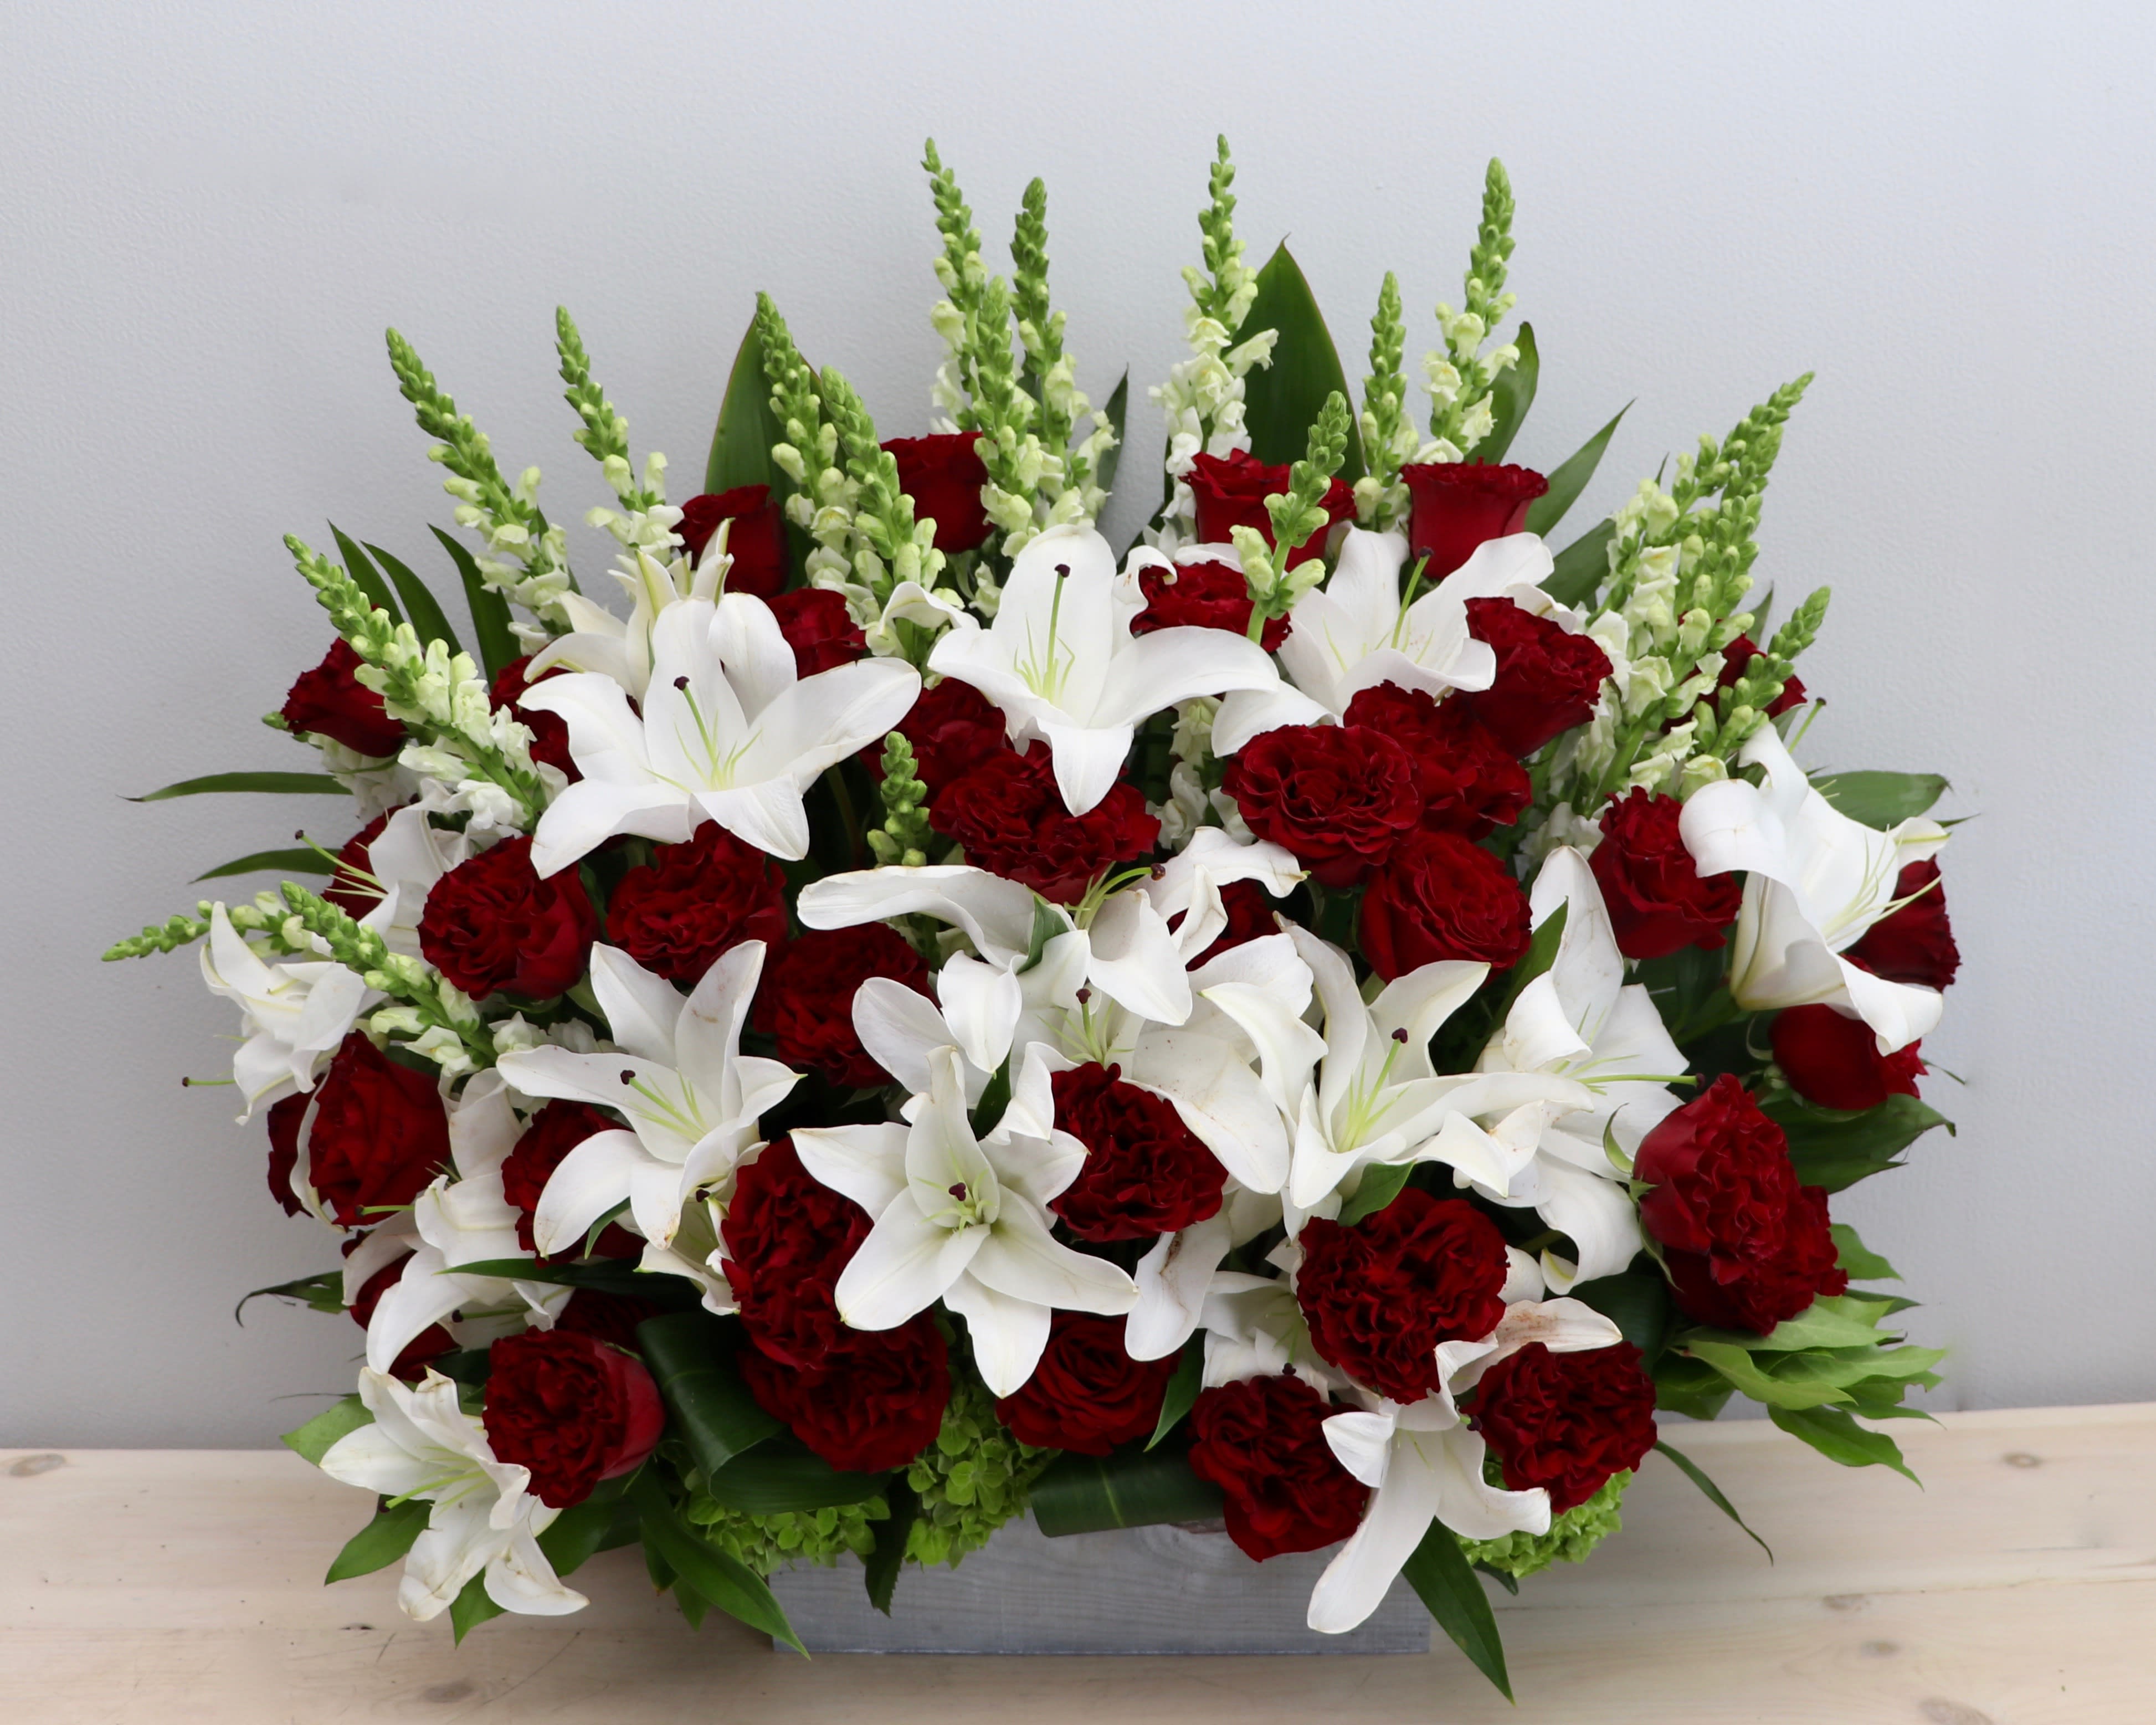 Star Gazers Love - Glendale Florist - Perfect for any occasion. This arrangement will stand out in any room. 